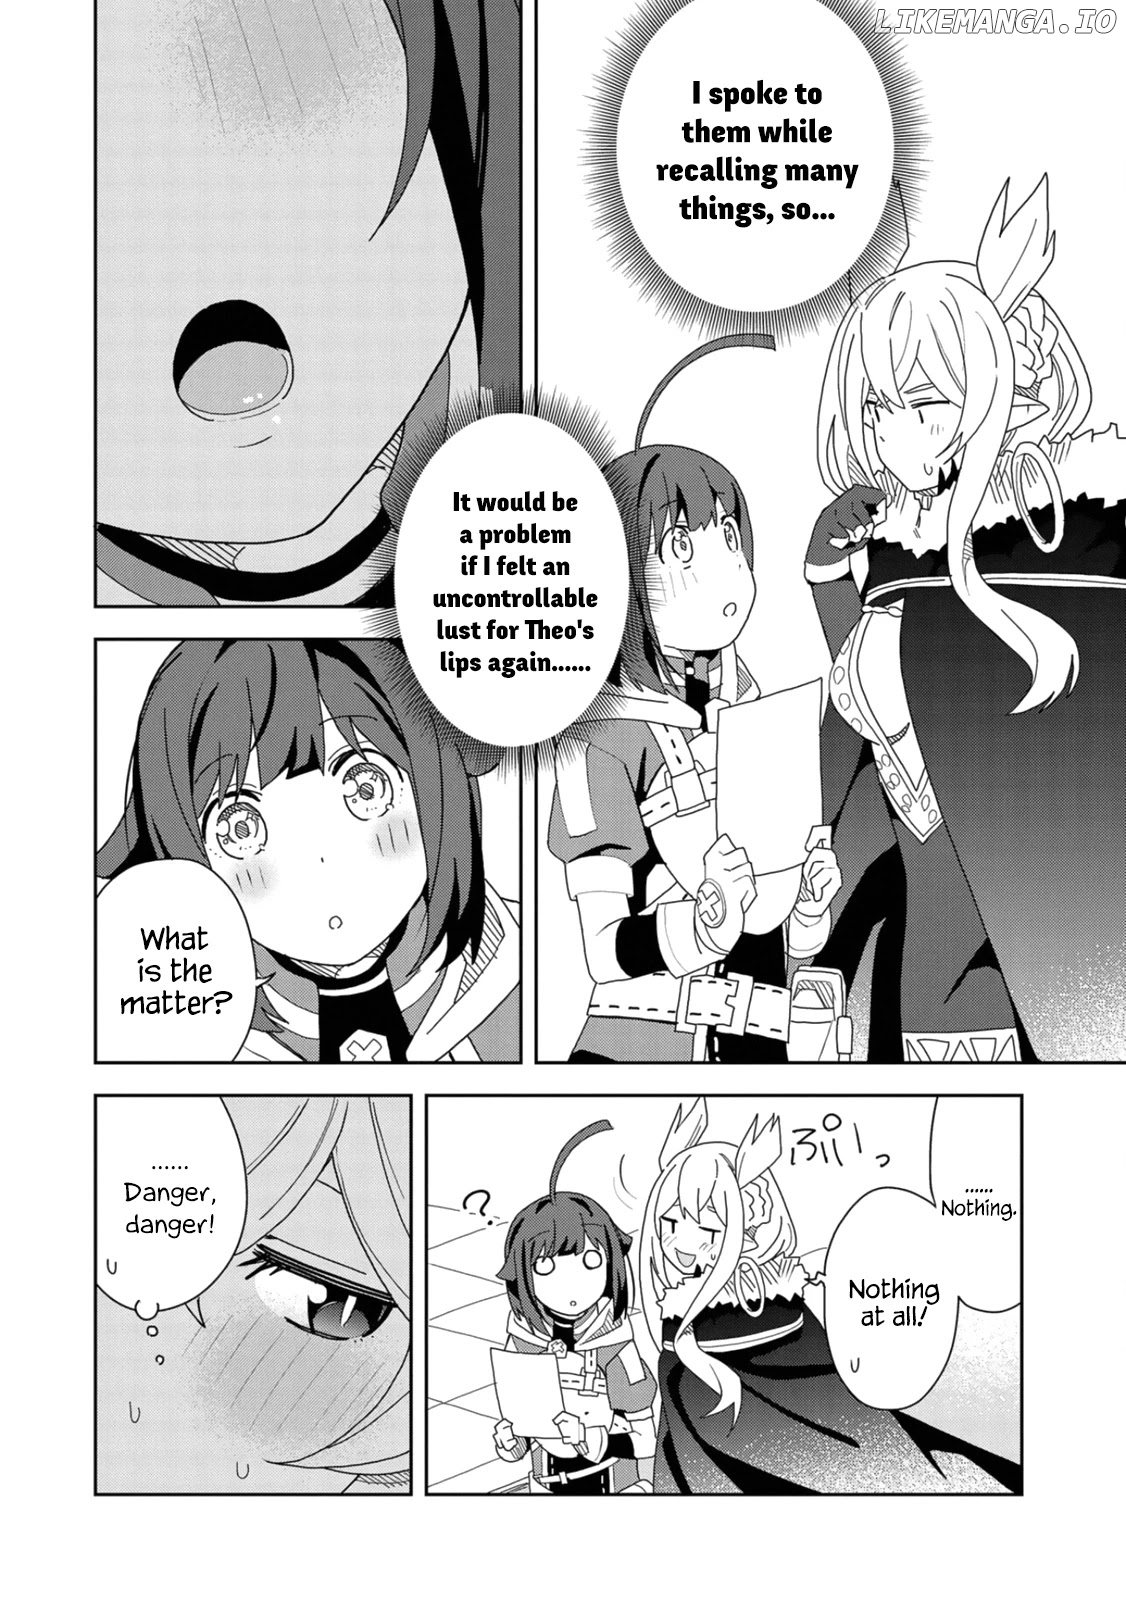 I Summoned The Devil To Grant Me a Wish, But I Married Her Instead Since She Was Adorable ~My New Devil Wife~ chapter 12 - page 4